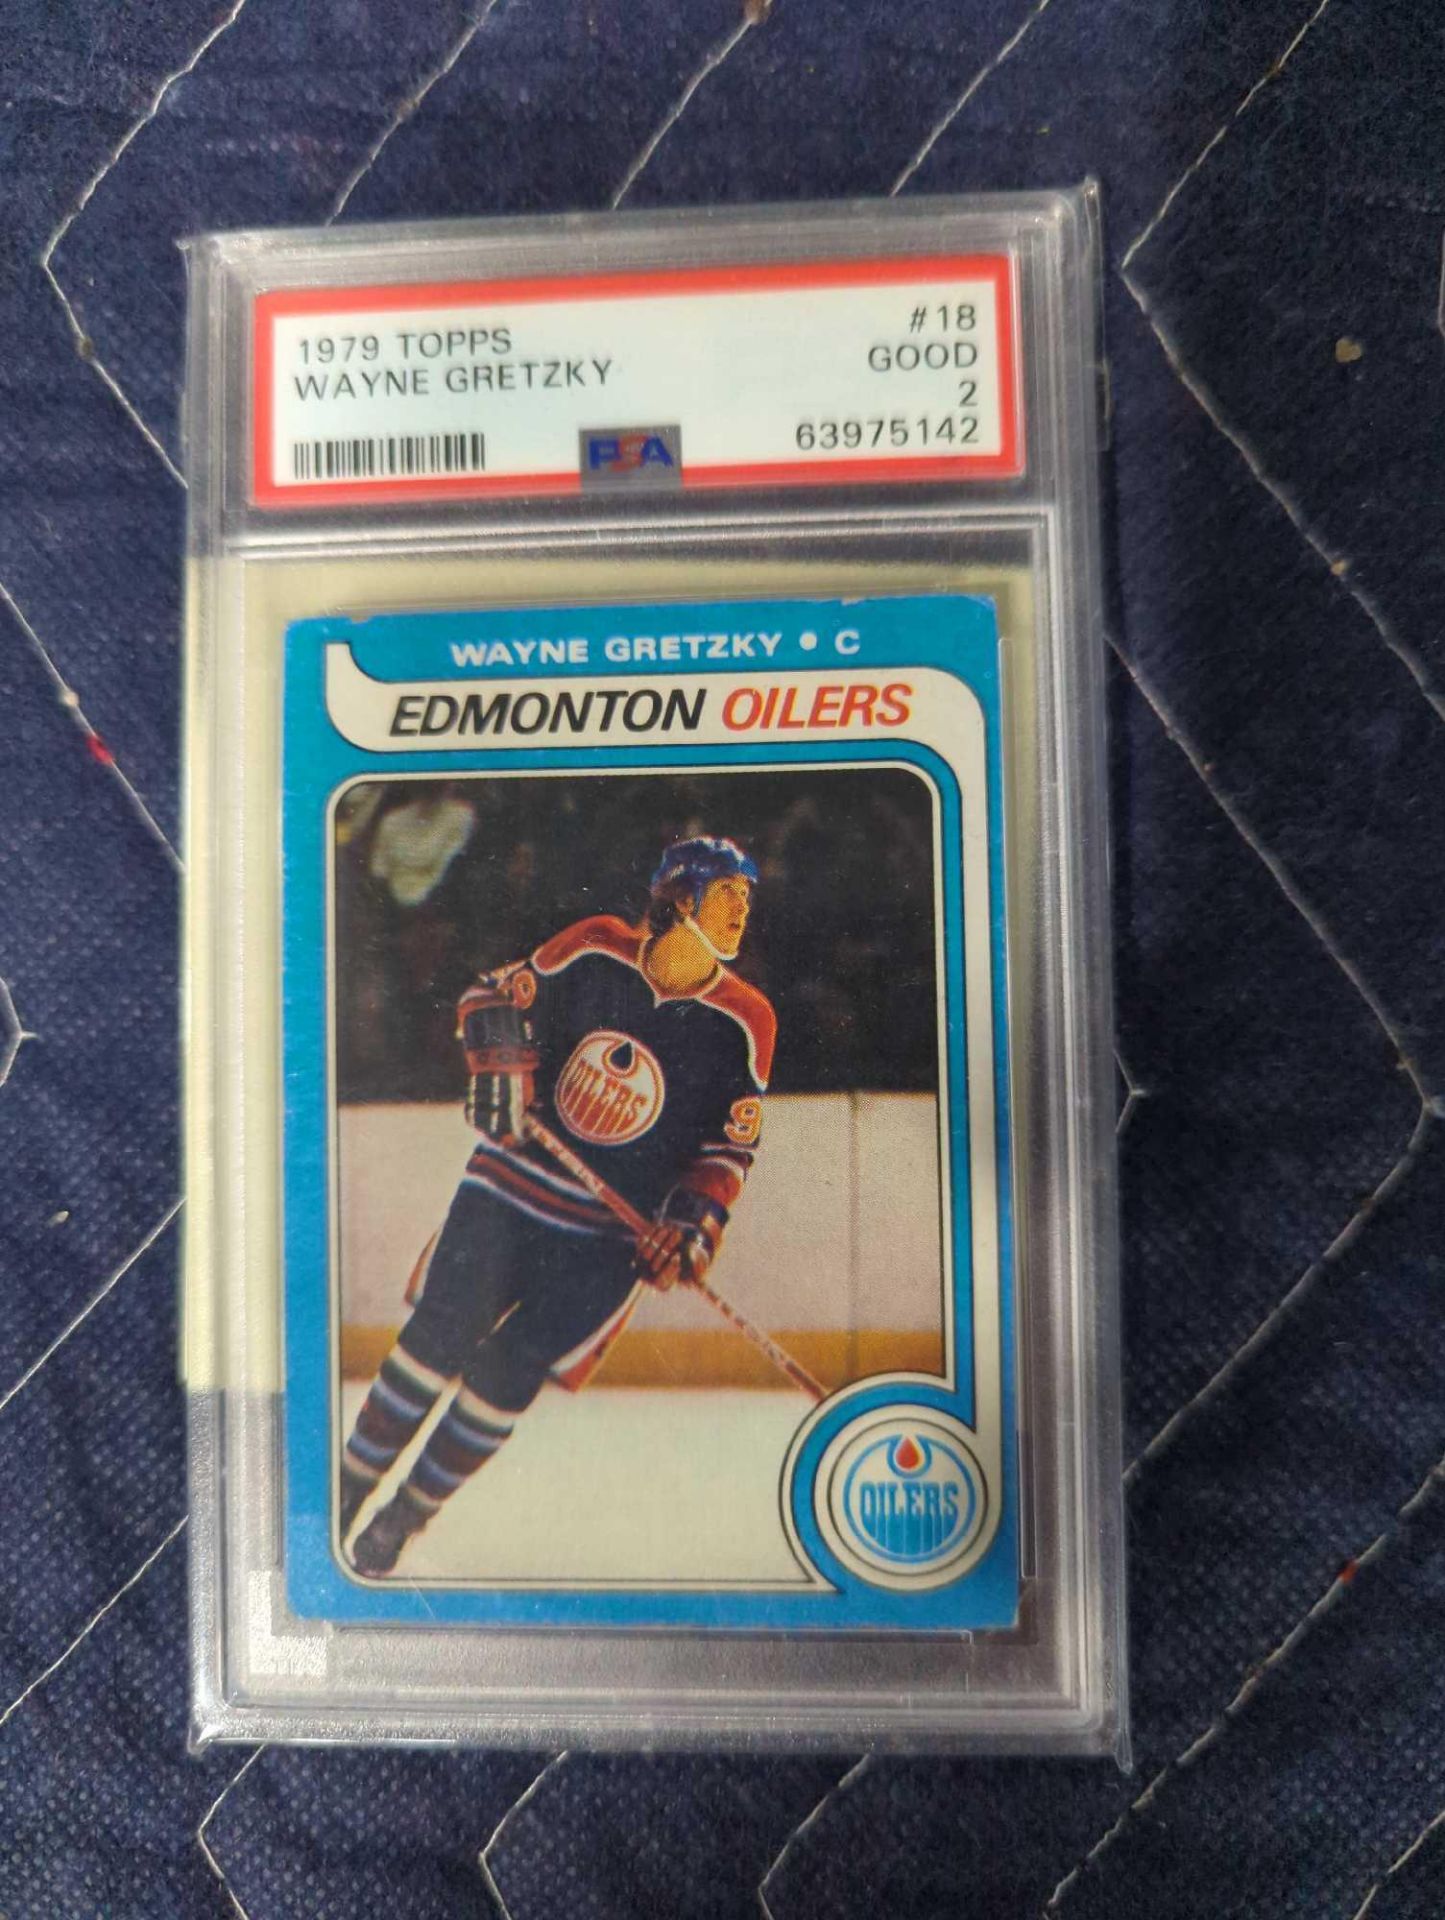 1978 Topps Wayne Gretzky Rookie Card PSA Graded Rookie Card - Image 5 of 5